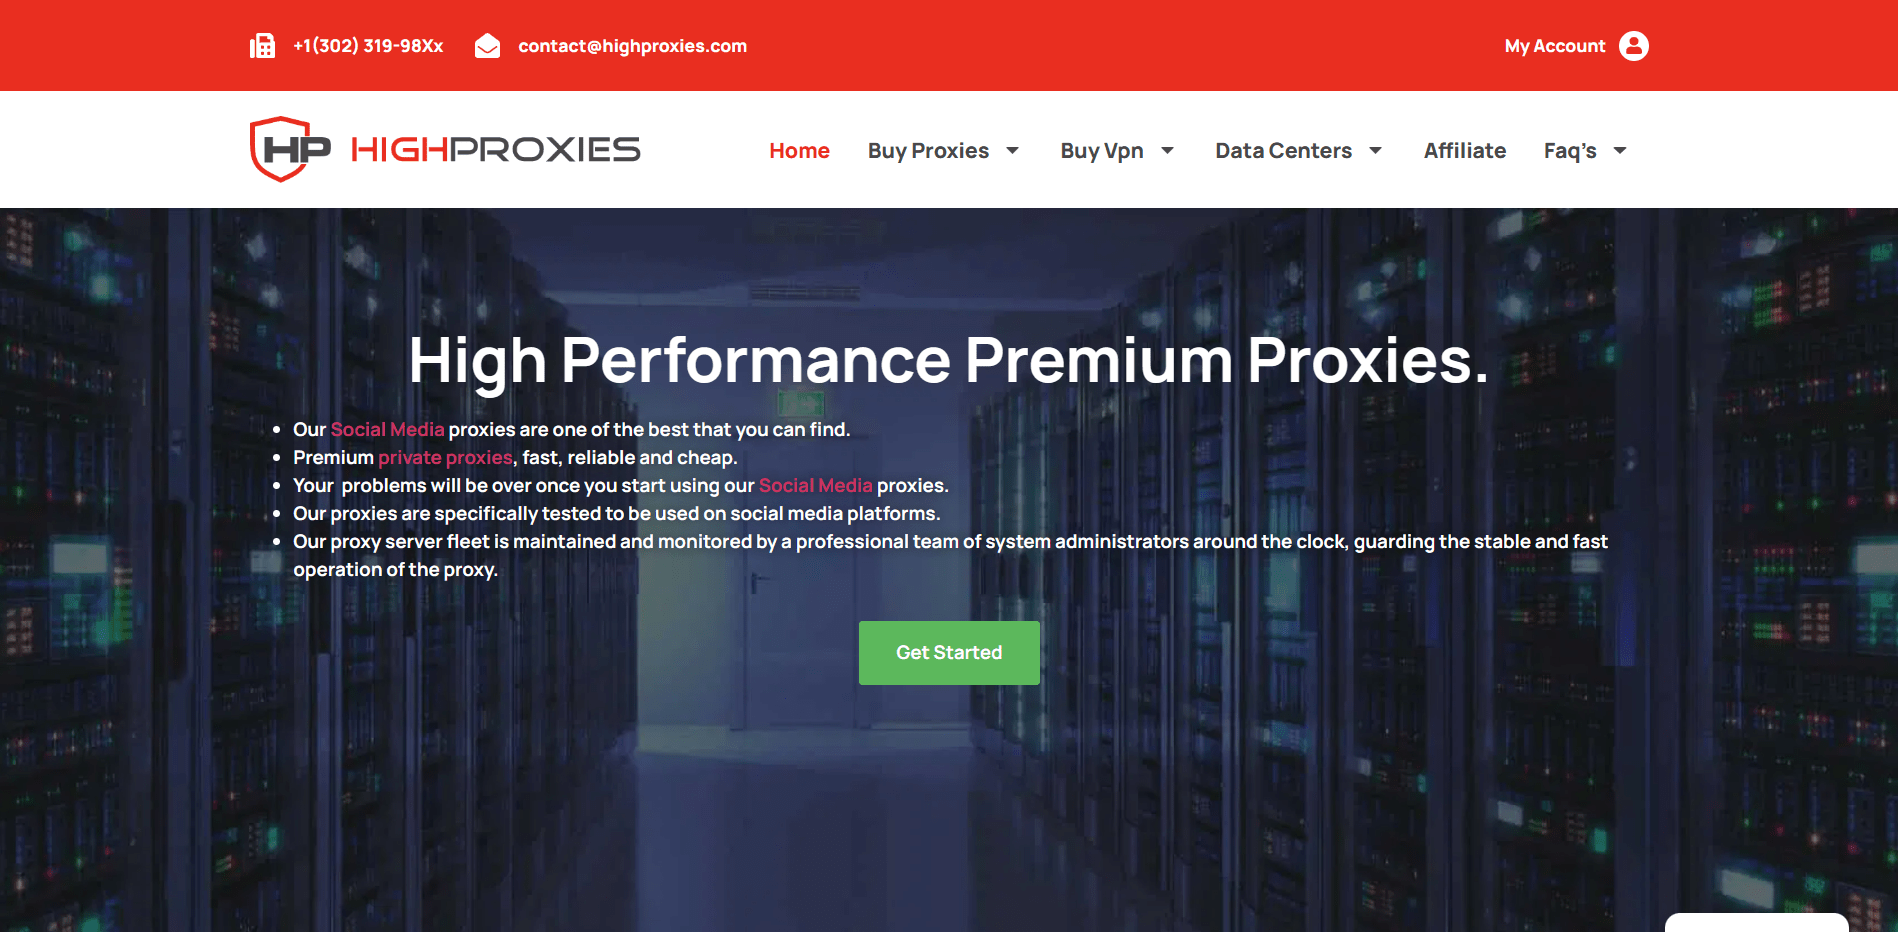 Top Shared Proxies - HighProxies